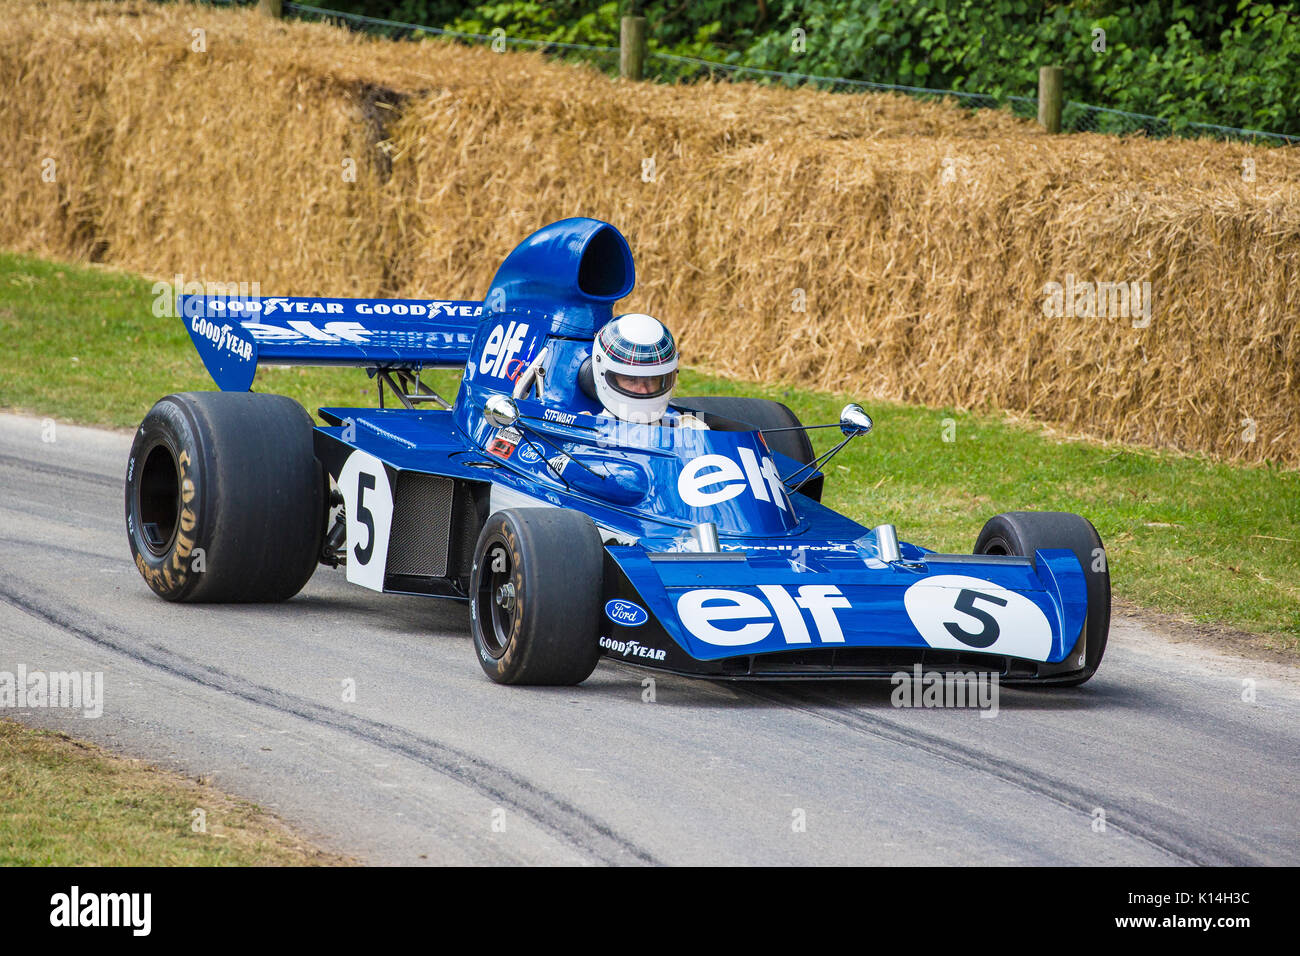 1973 Tyrrell-Cosworth 006 with driver Mark Stewart at the 2017 Goodwood Festival of Speed, Sussex, UK. Stock Photo